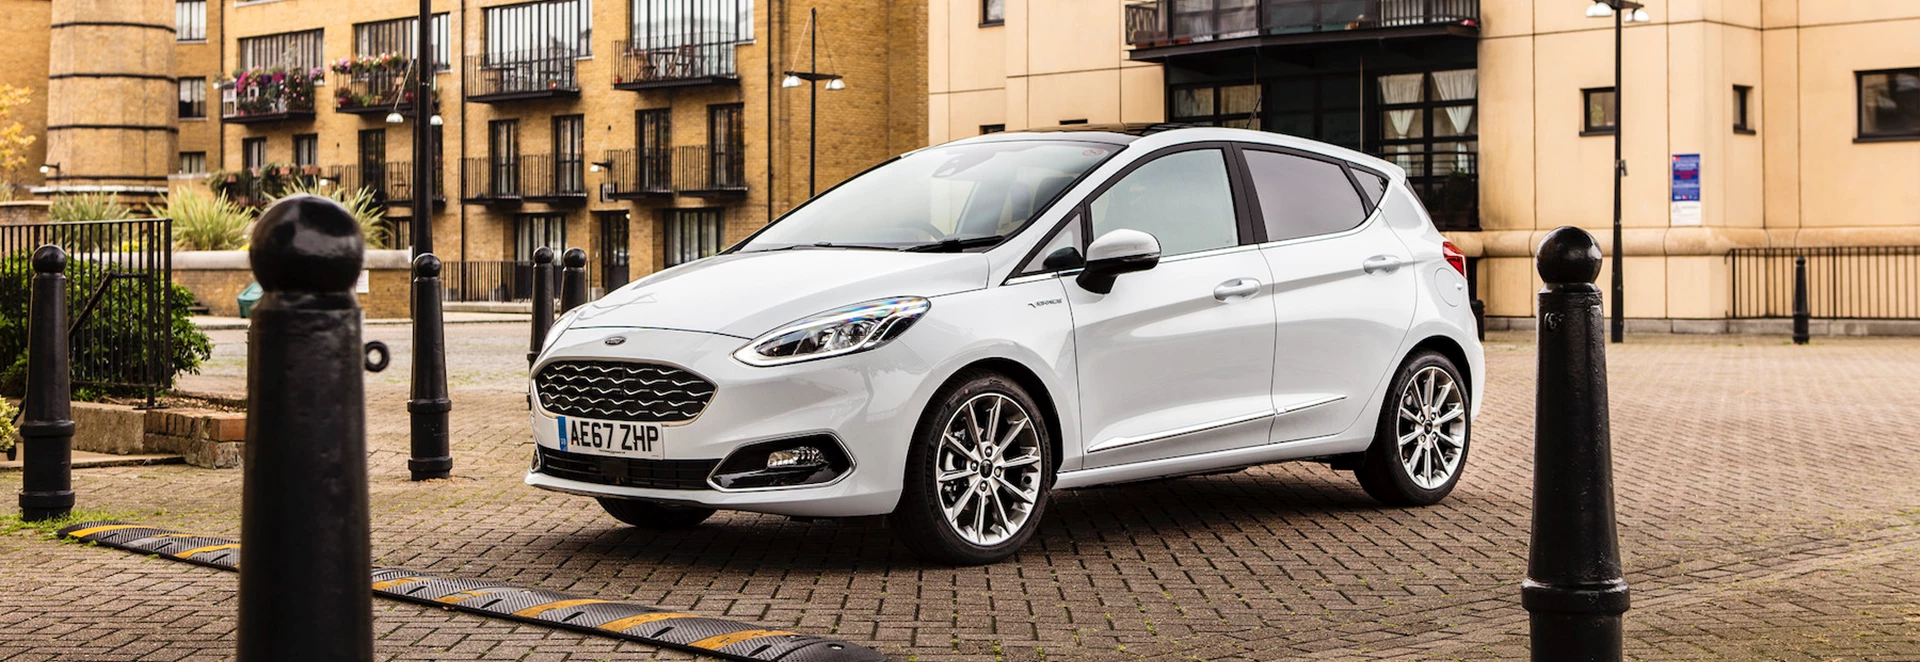 Buyer’s guide to the Ford Fiesta